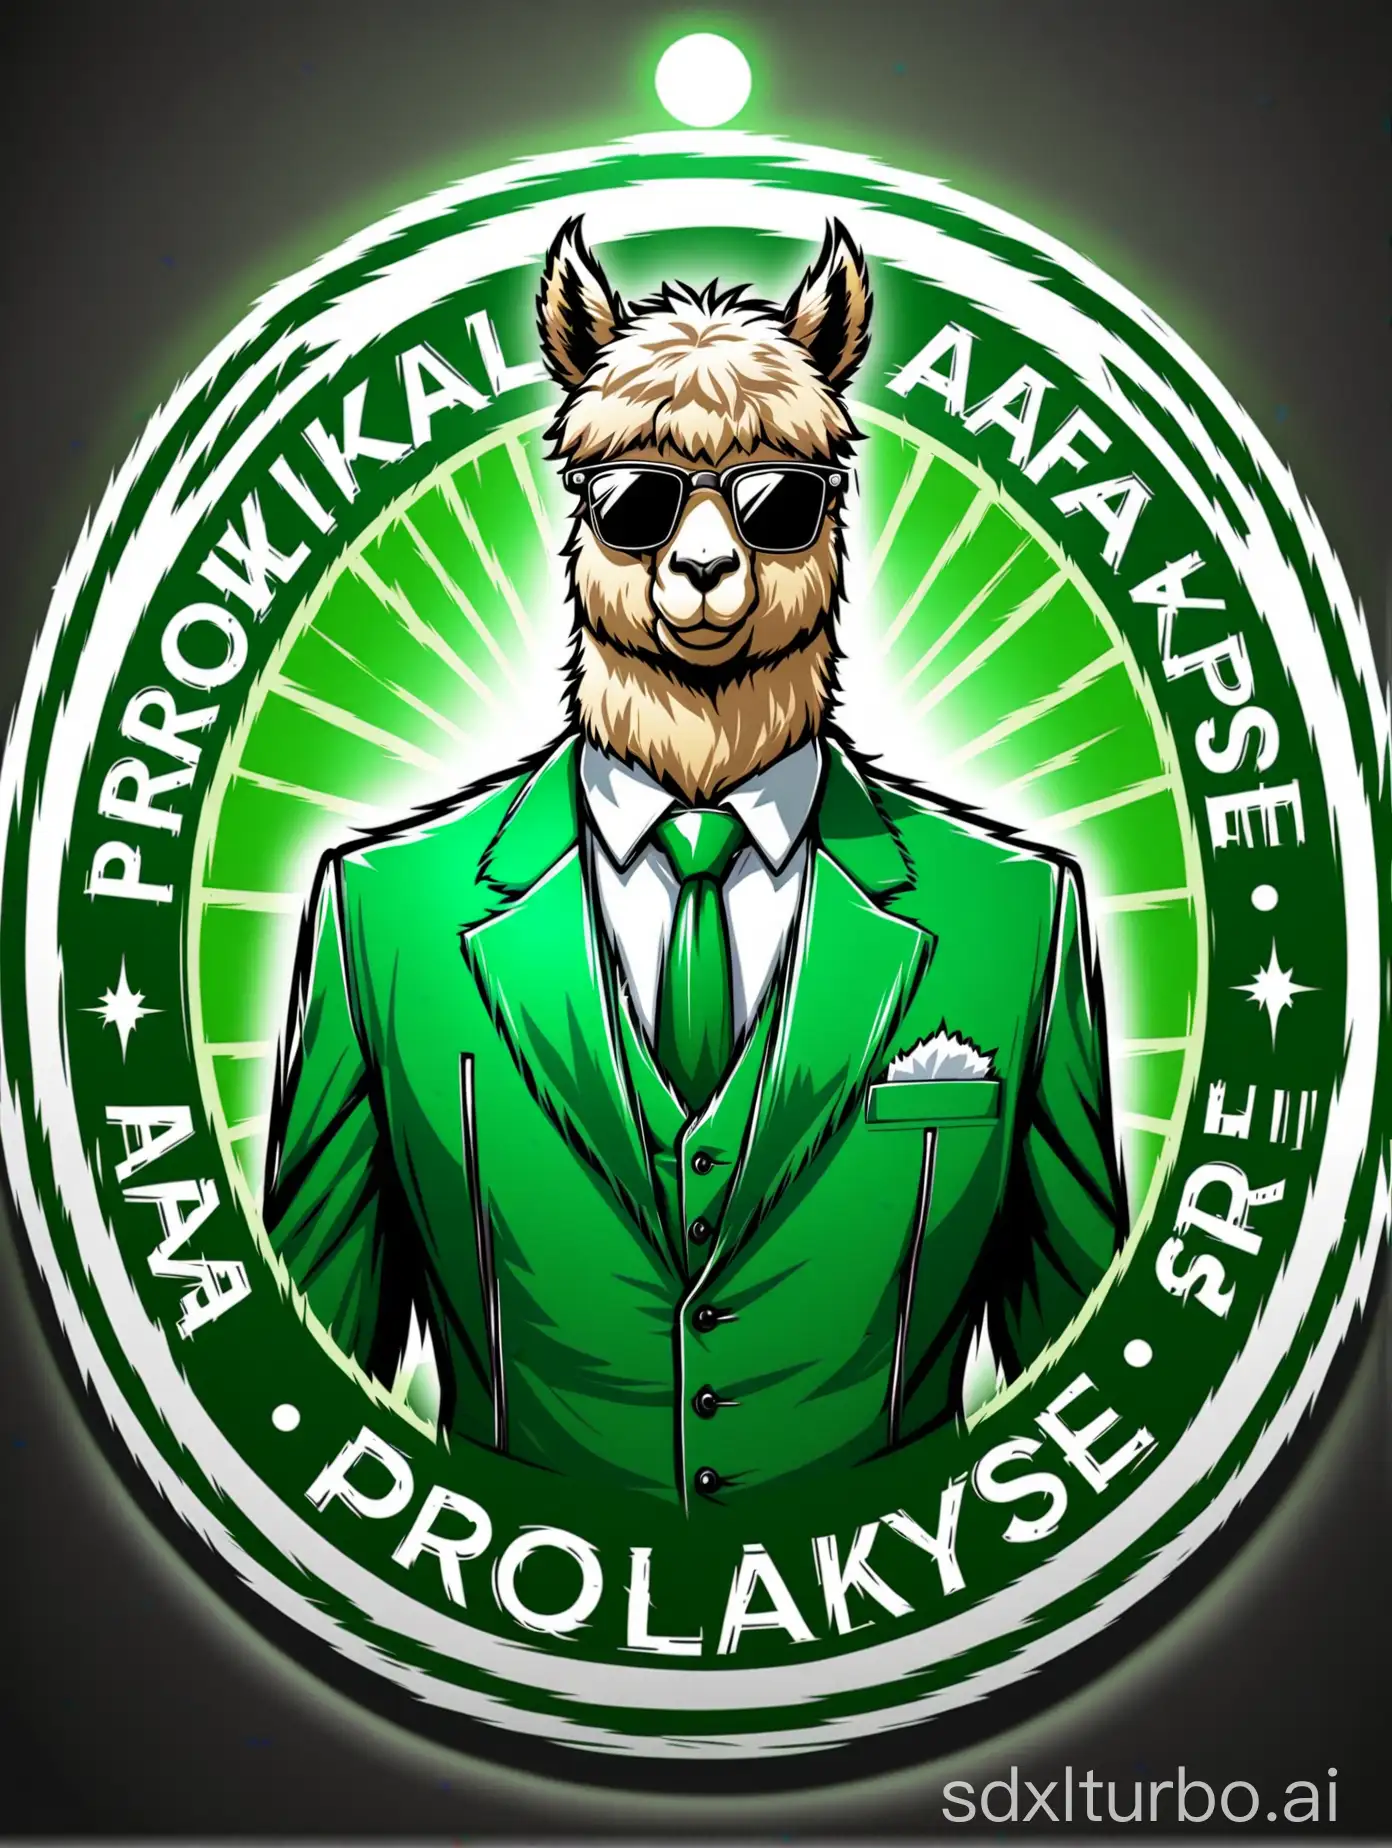 Create round logo in a realistic human-like presenter character: handsome alpaca in a mafia suit and have a white border with the word "Provokalypse" written in green.